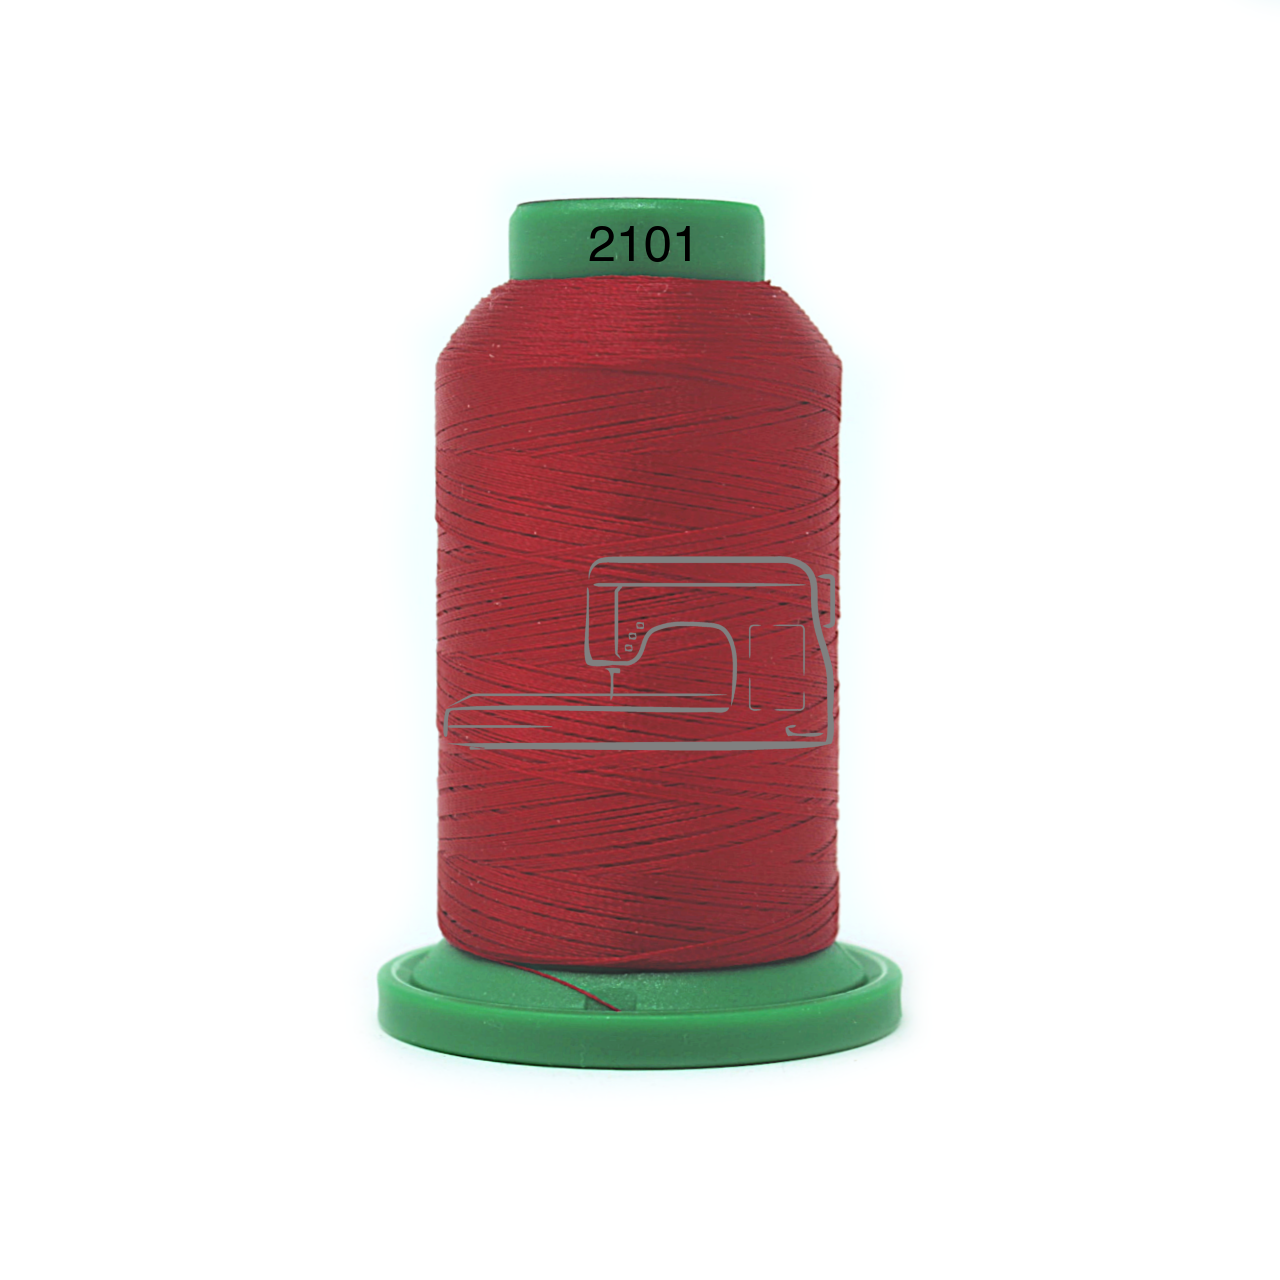 Isacord Isacord sewing and embroidery thread 2101